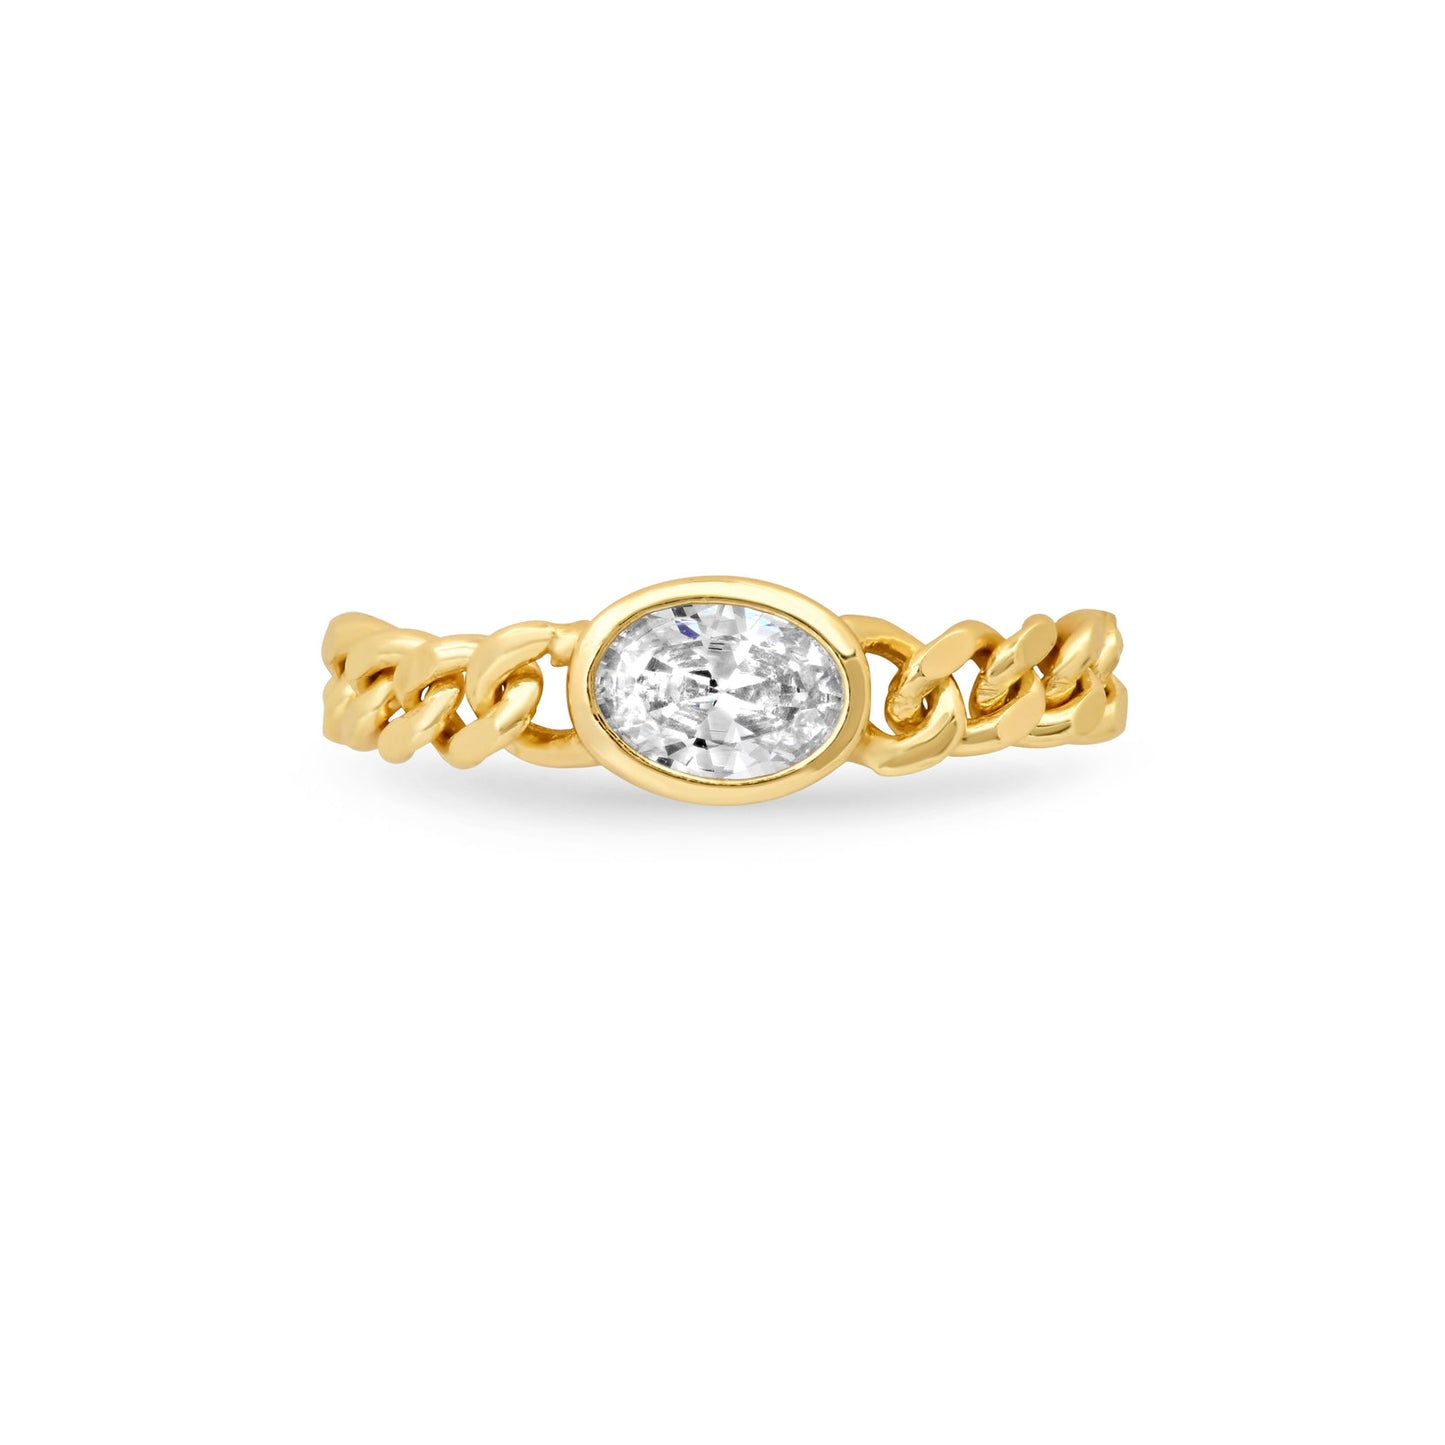 CUBAN LINK CZ OVAL RING, GOLD